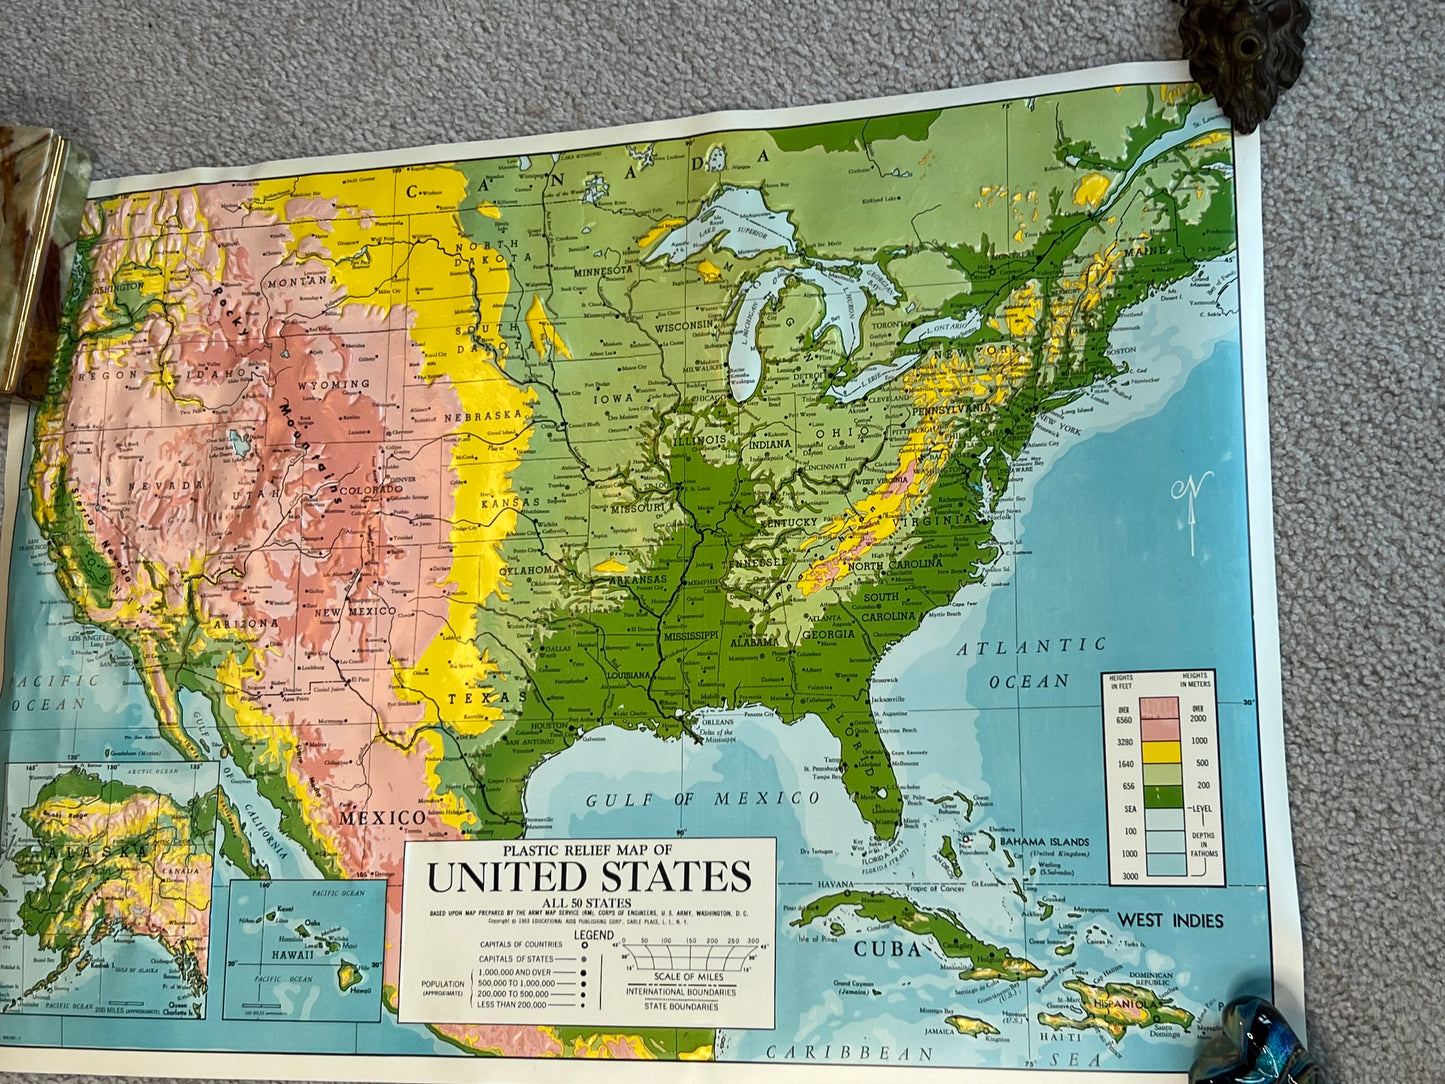 Vintage Plastic Relief Map of The United States Educational Aids U. S. Army